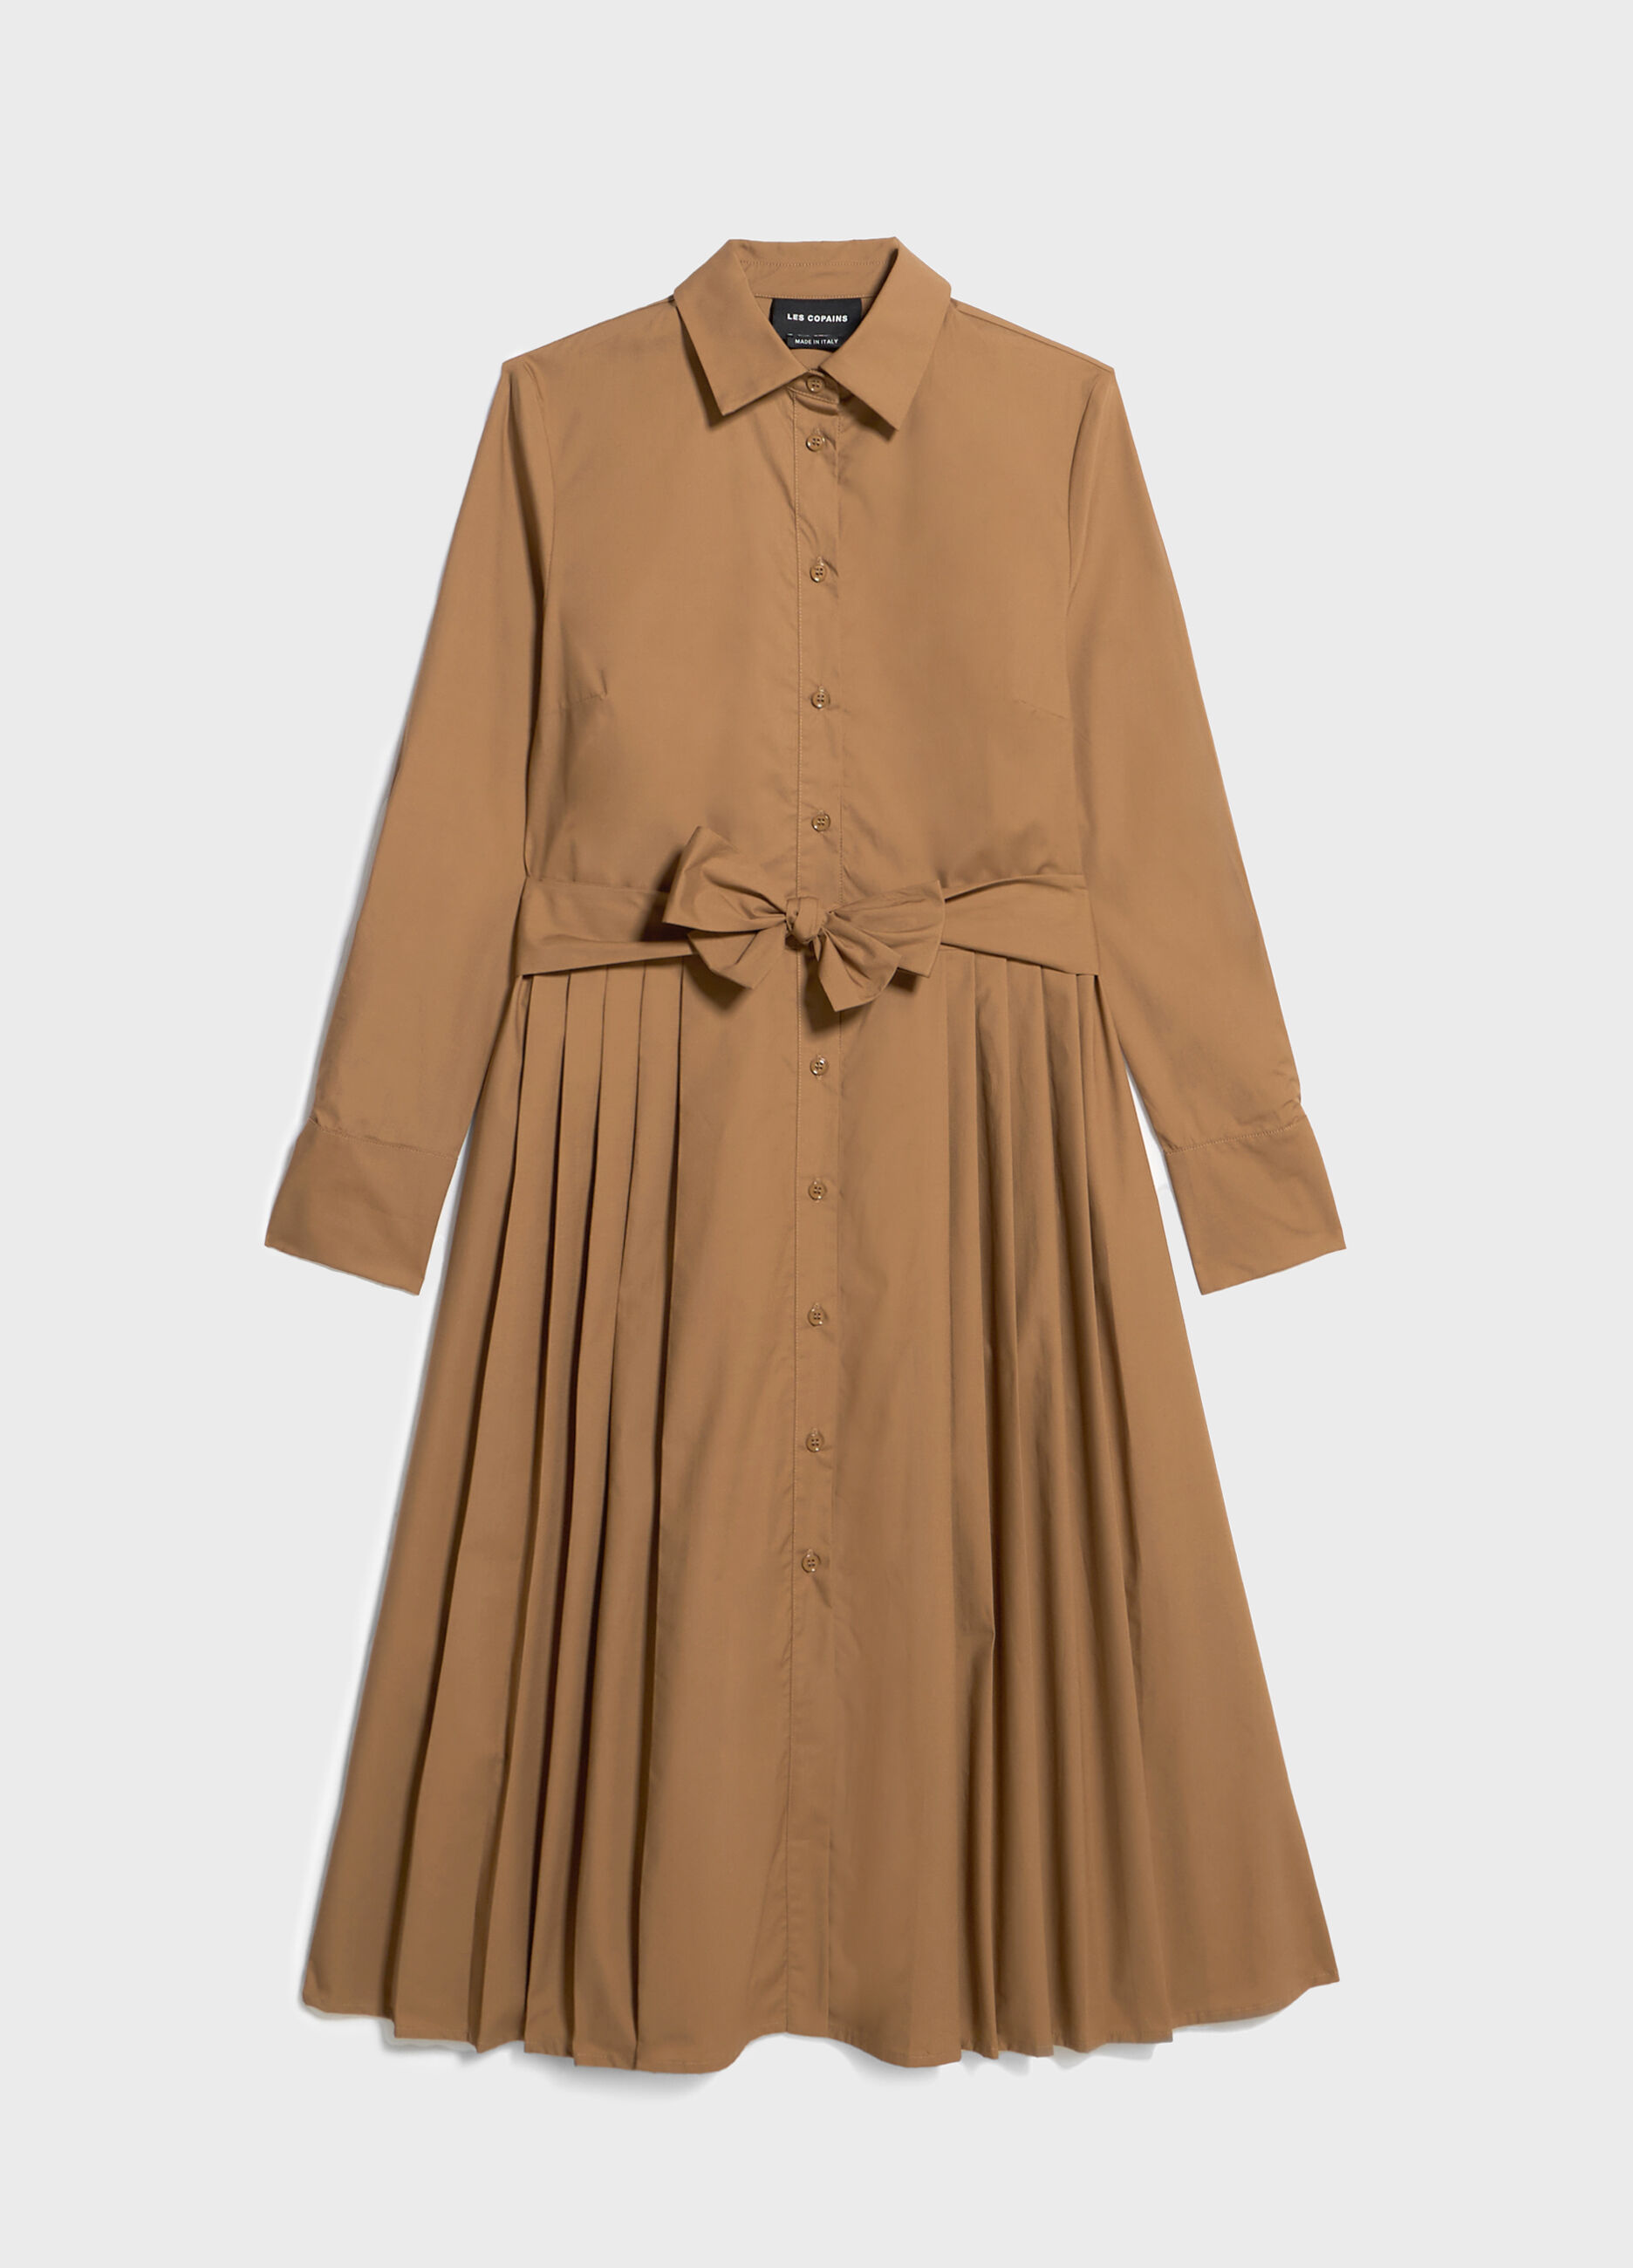 Pleated dress in 100% cotton